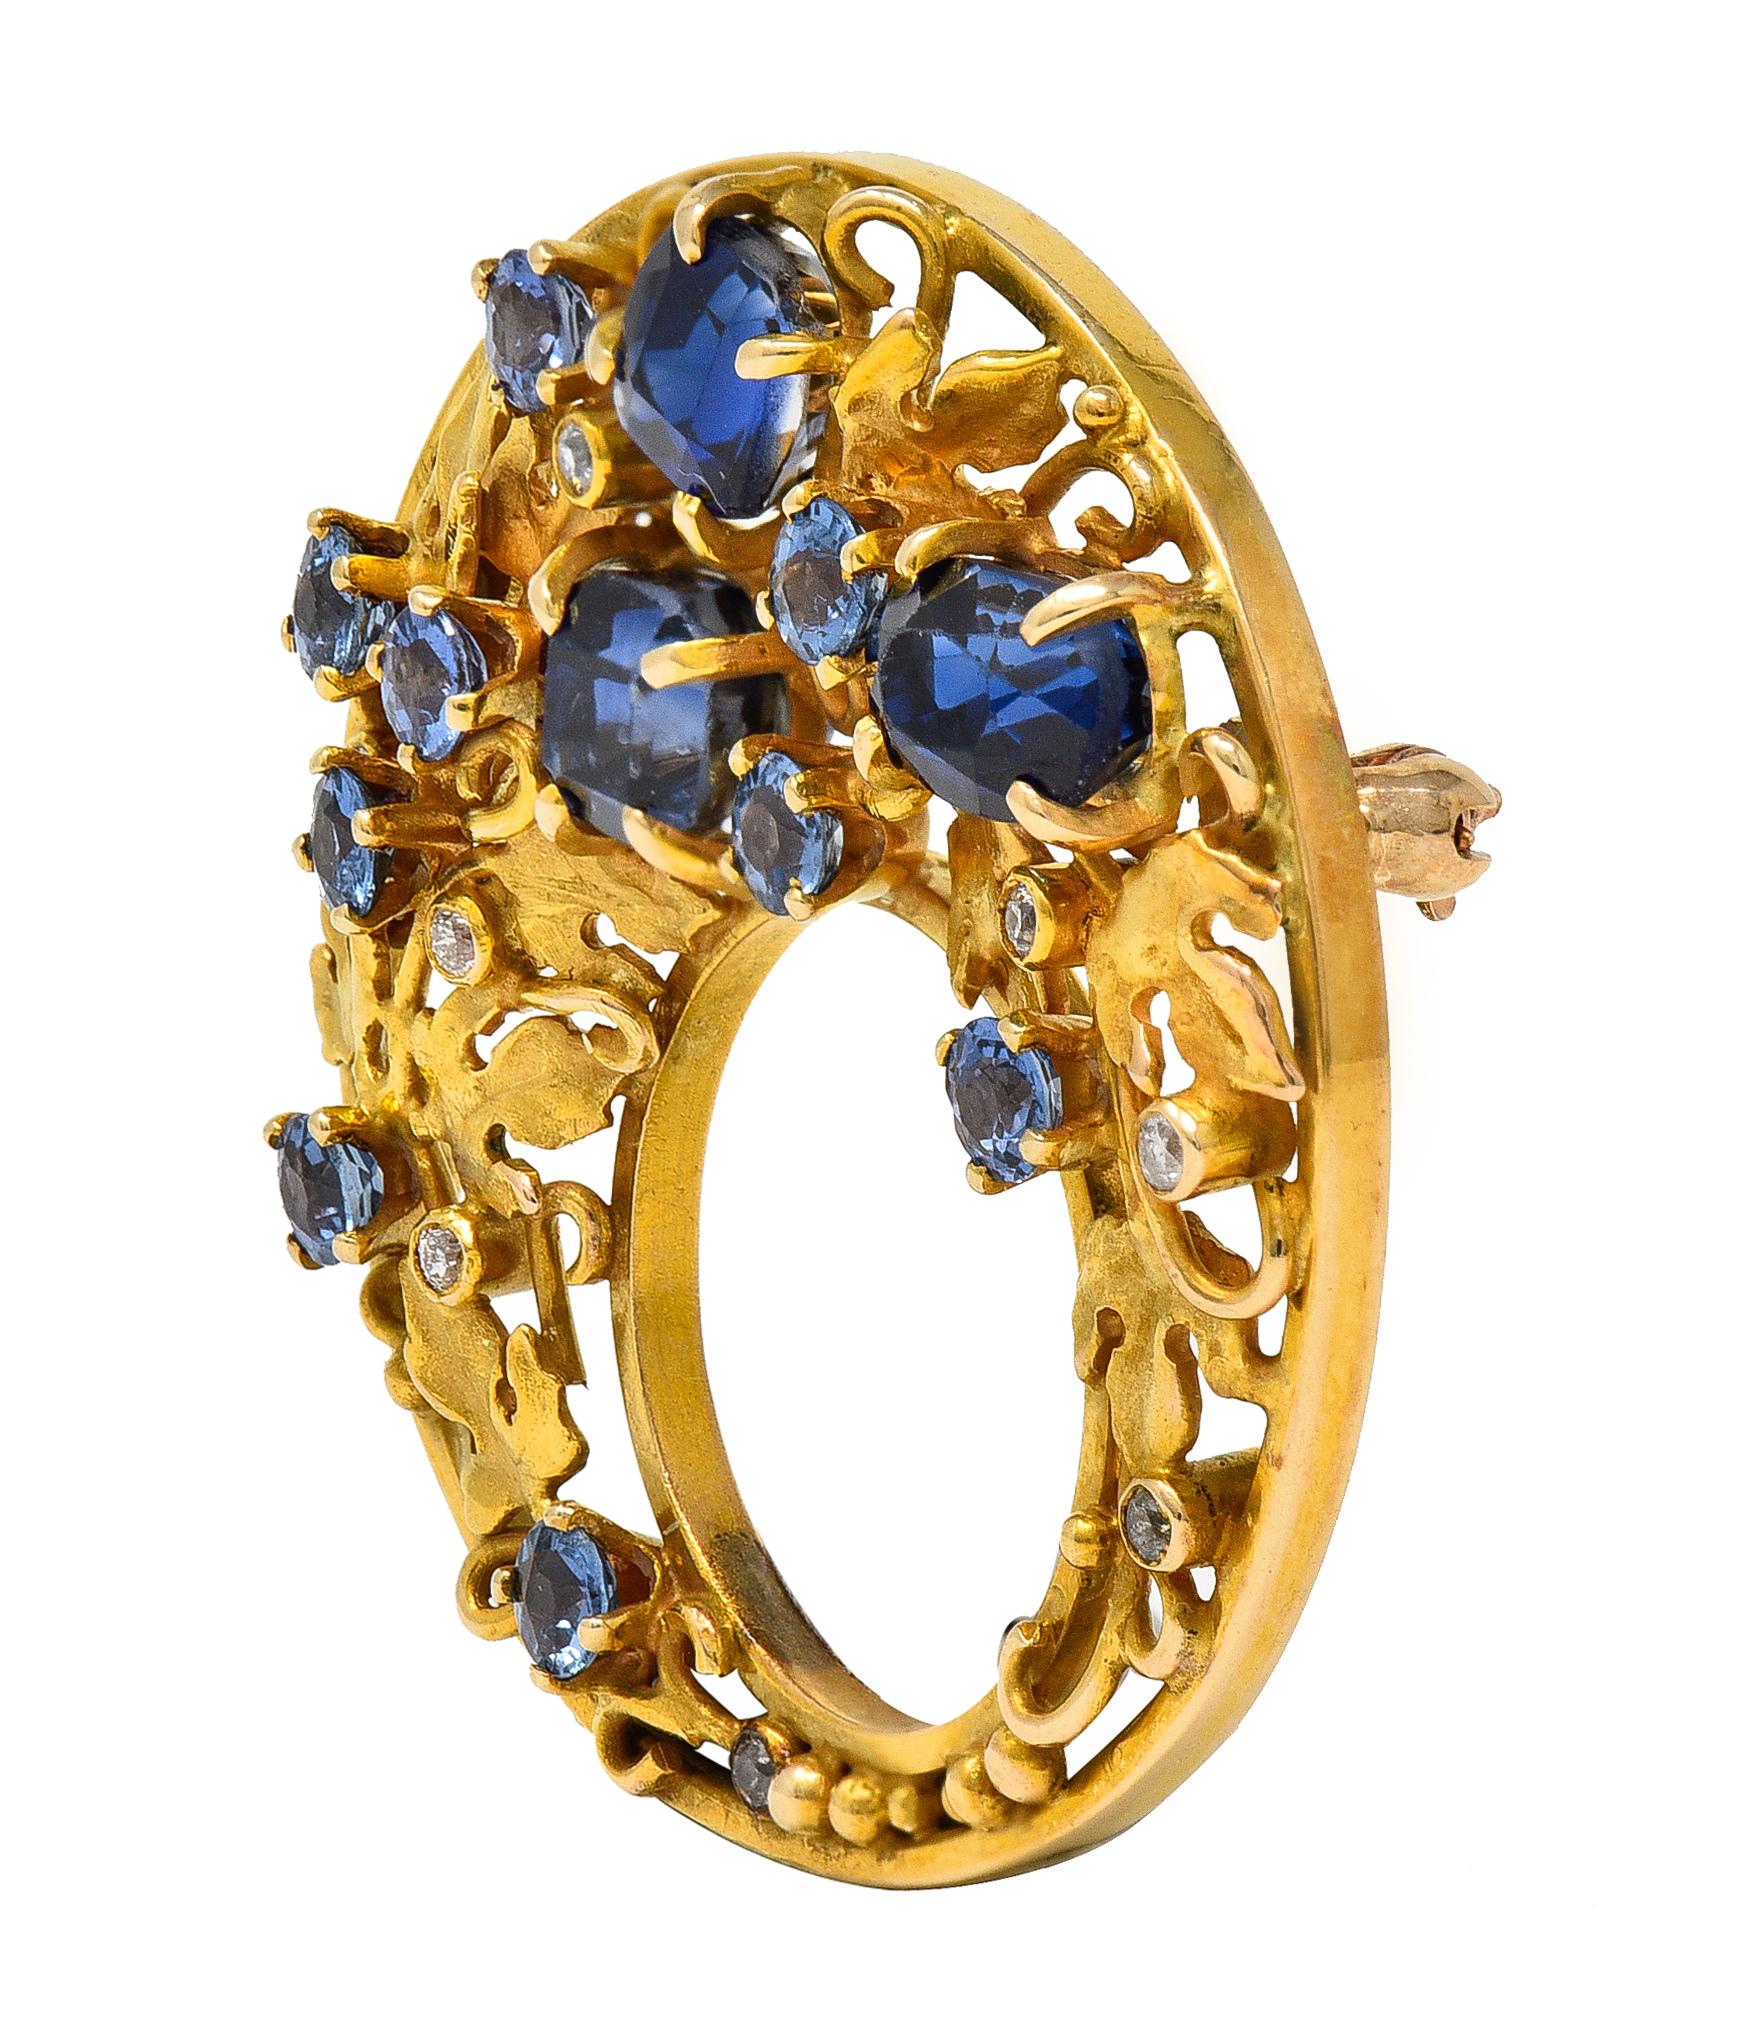 Designed as a circular disk form comprised of pierced creeping ivy motif 
With curling vines, leaves, and gold beading throughout
Prong set throughout with round and cushion cut sapphires
Weighing approximately 2.73 carats total 
Transparent light